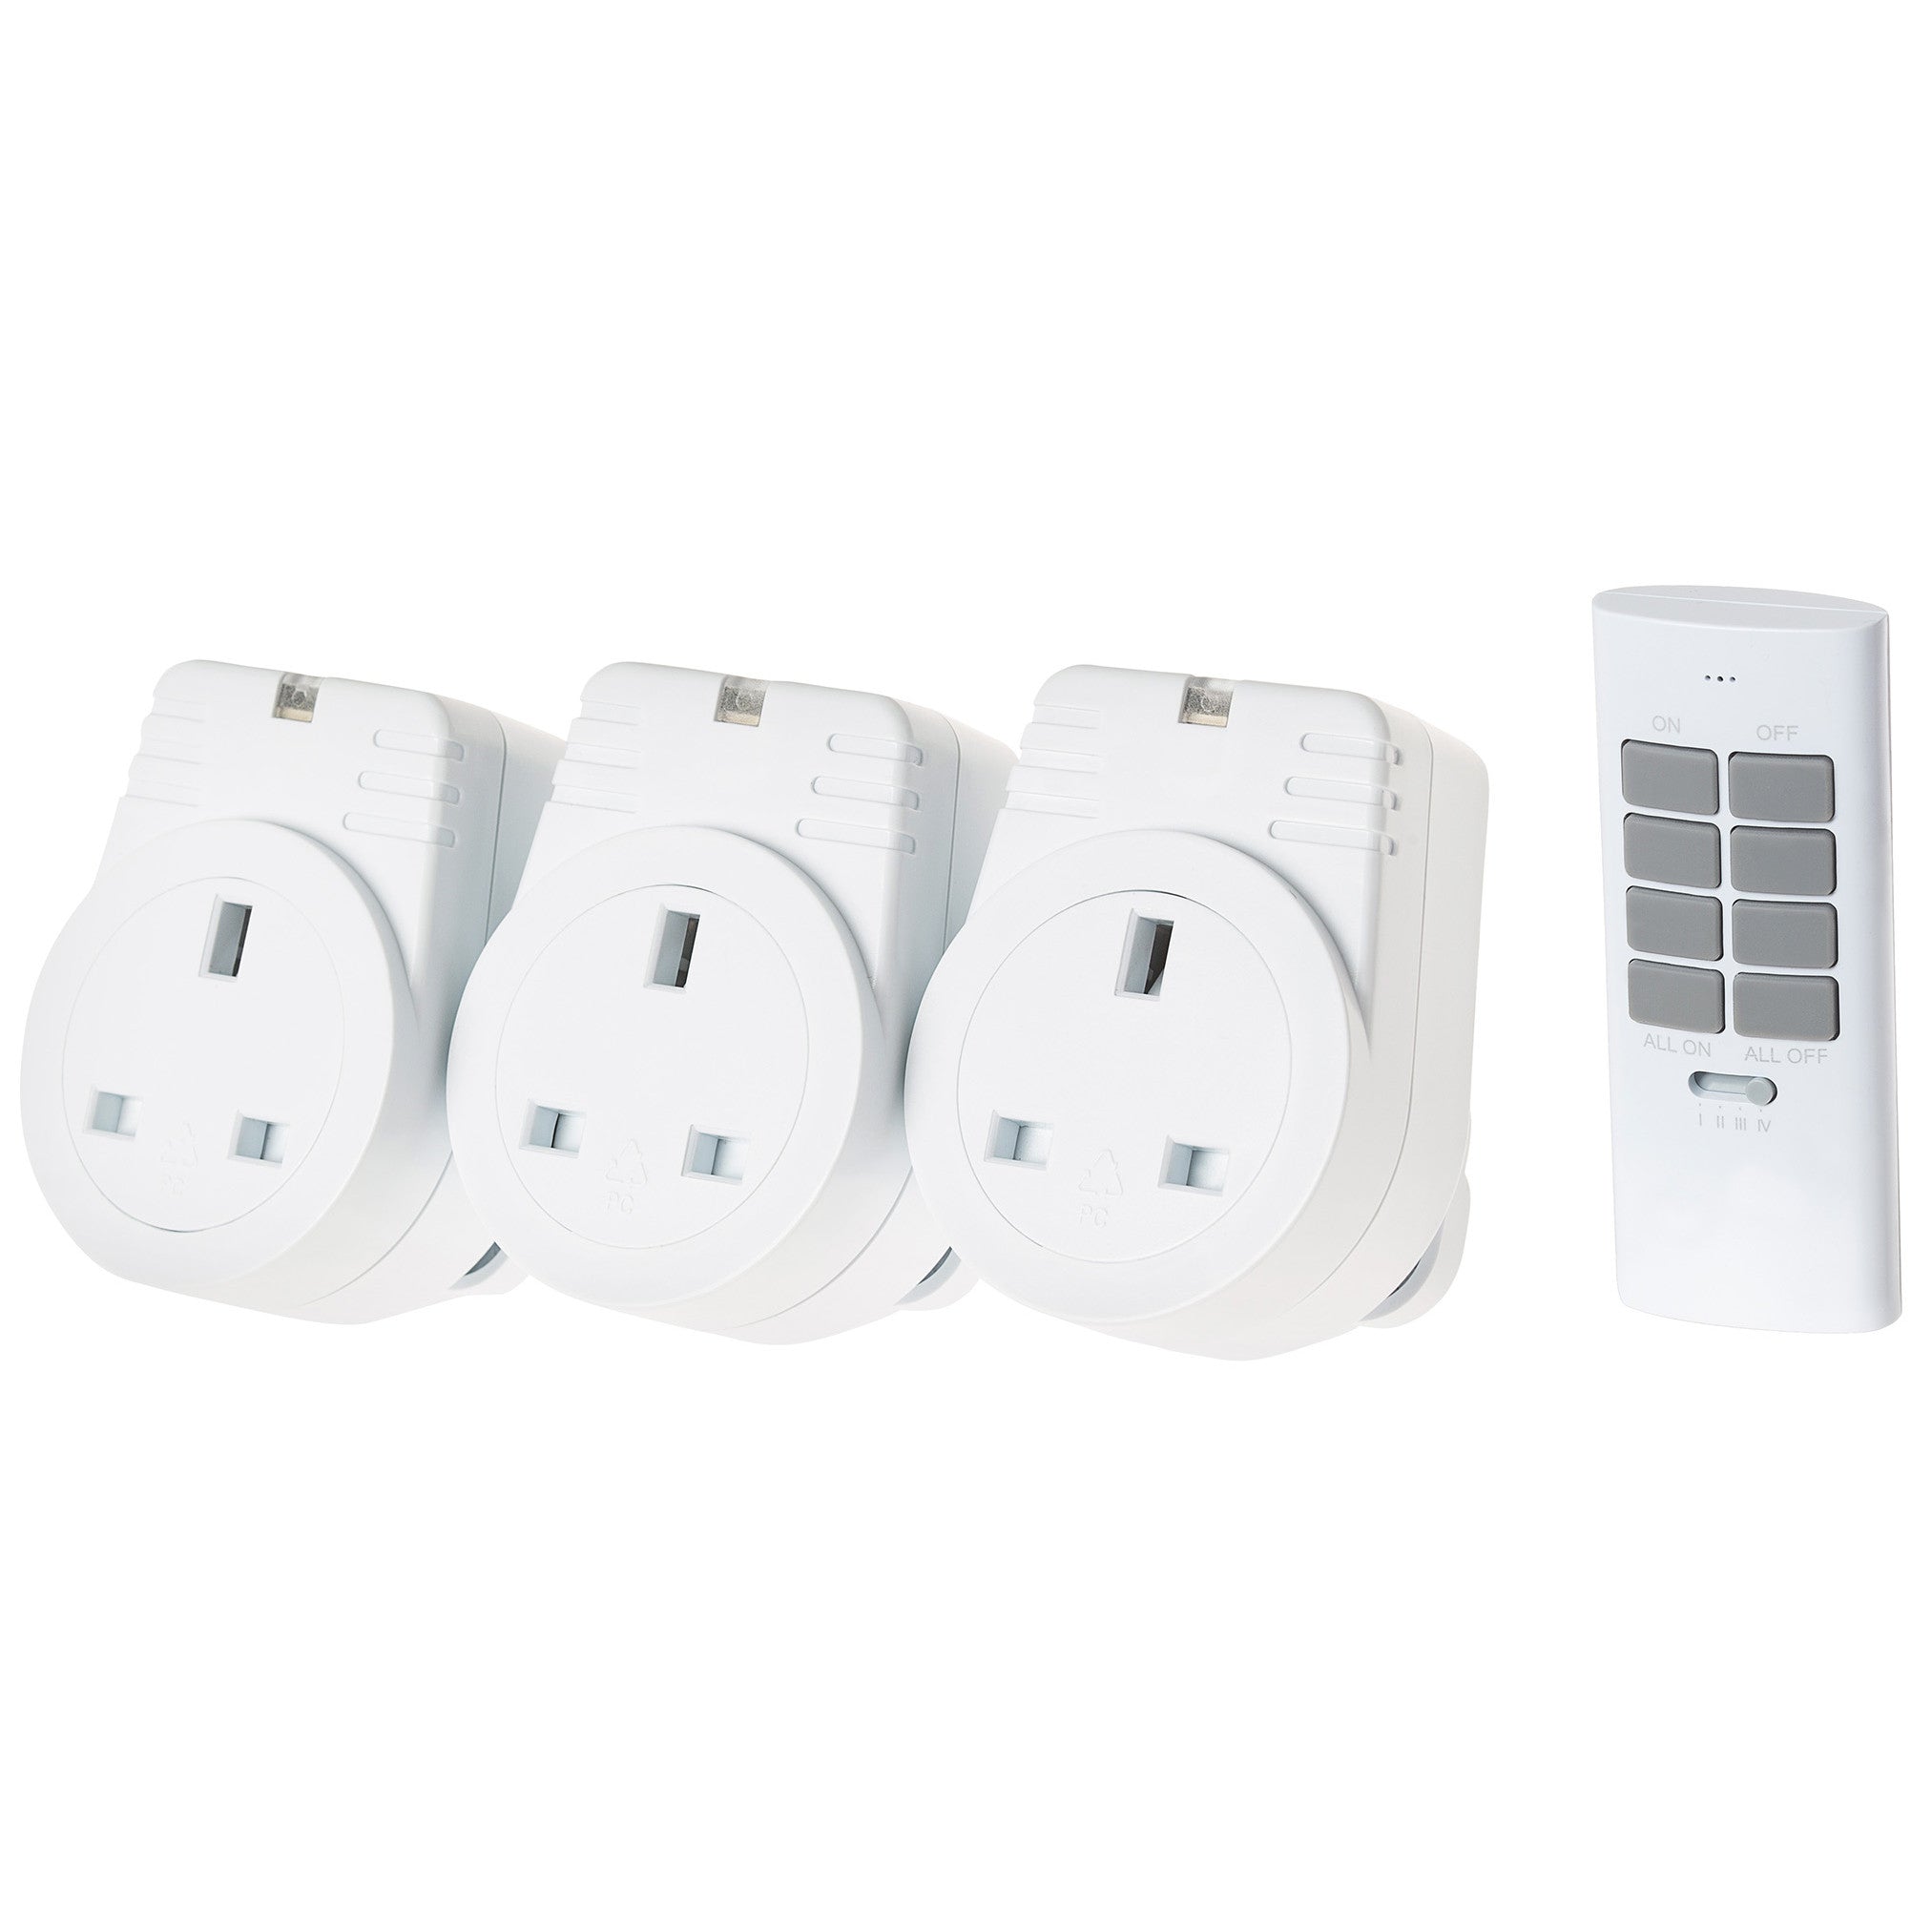 Maplin ORB RF Remote Controlled Mains Plug Sockets Set Version S2 - 3 Pack, White - maplin.co.uk